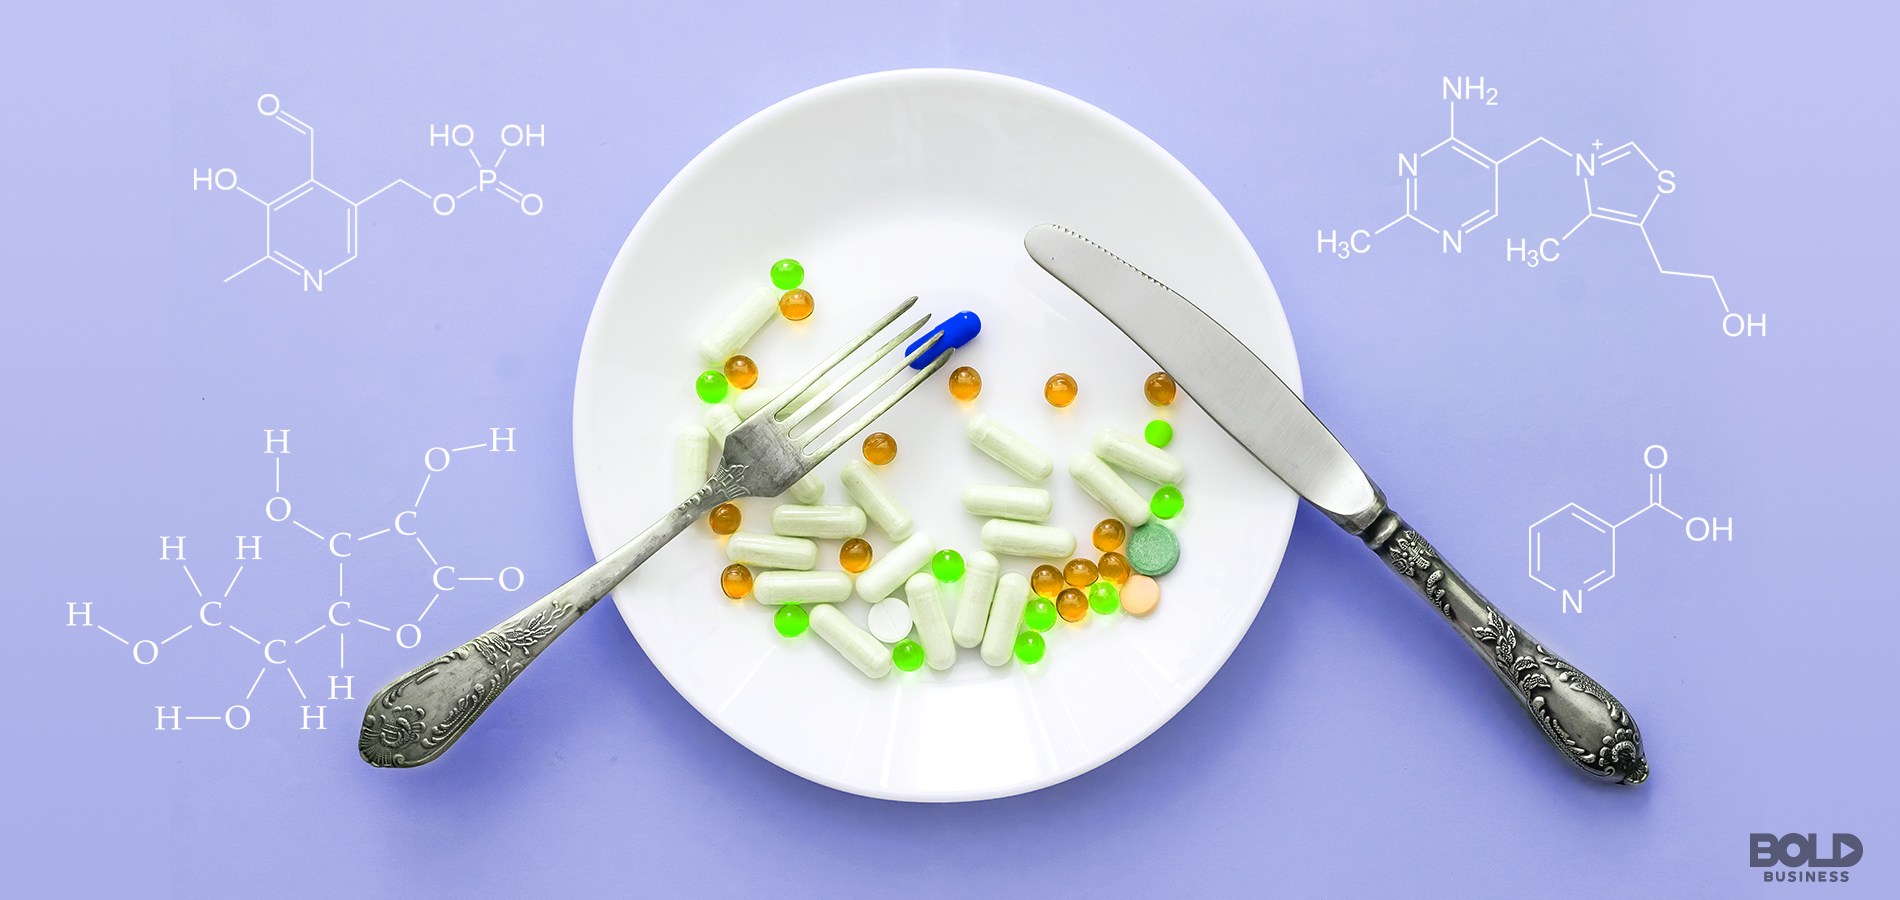 diet based on genetics with different kinds of pills on a plate